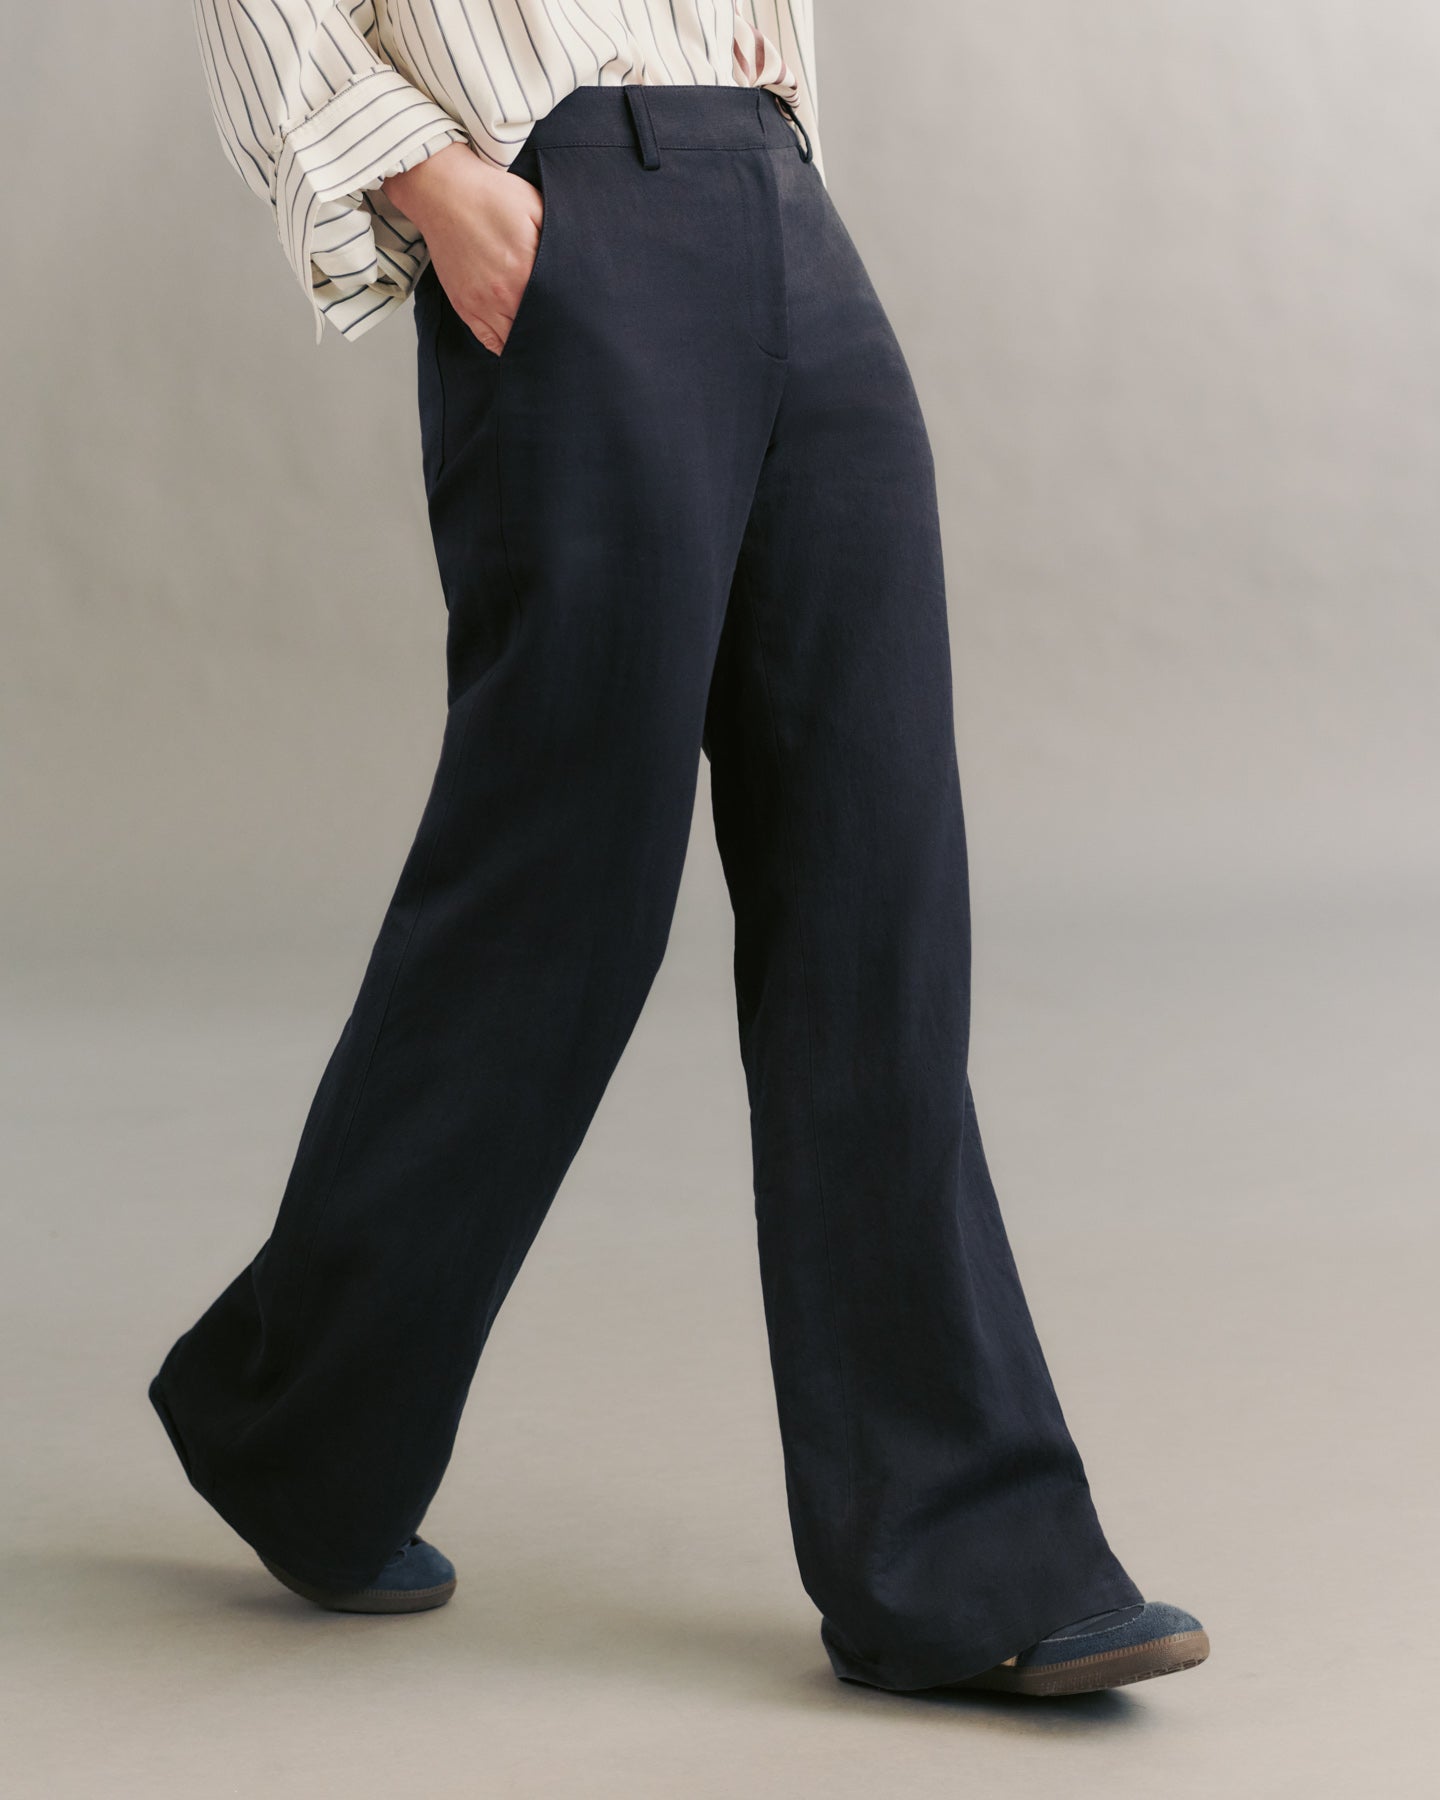 TWP Midnight Howard Pant in cotton linen view 1